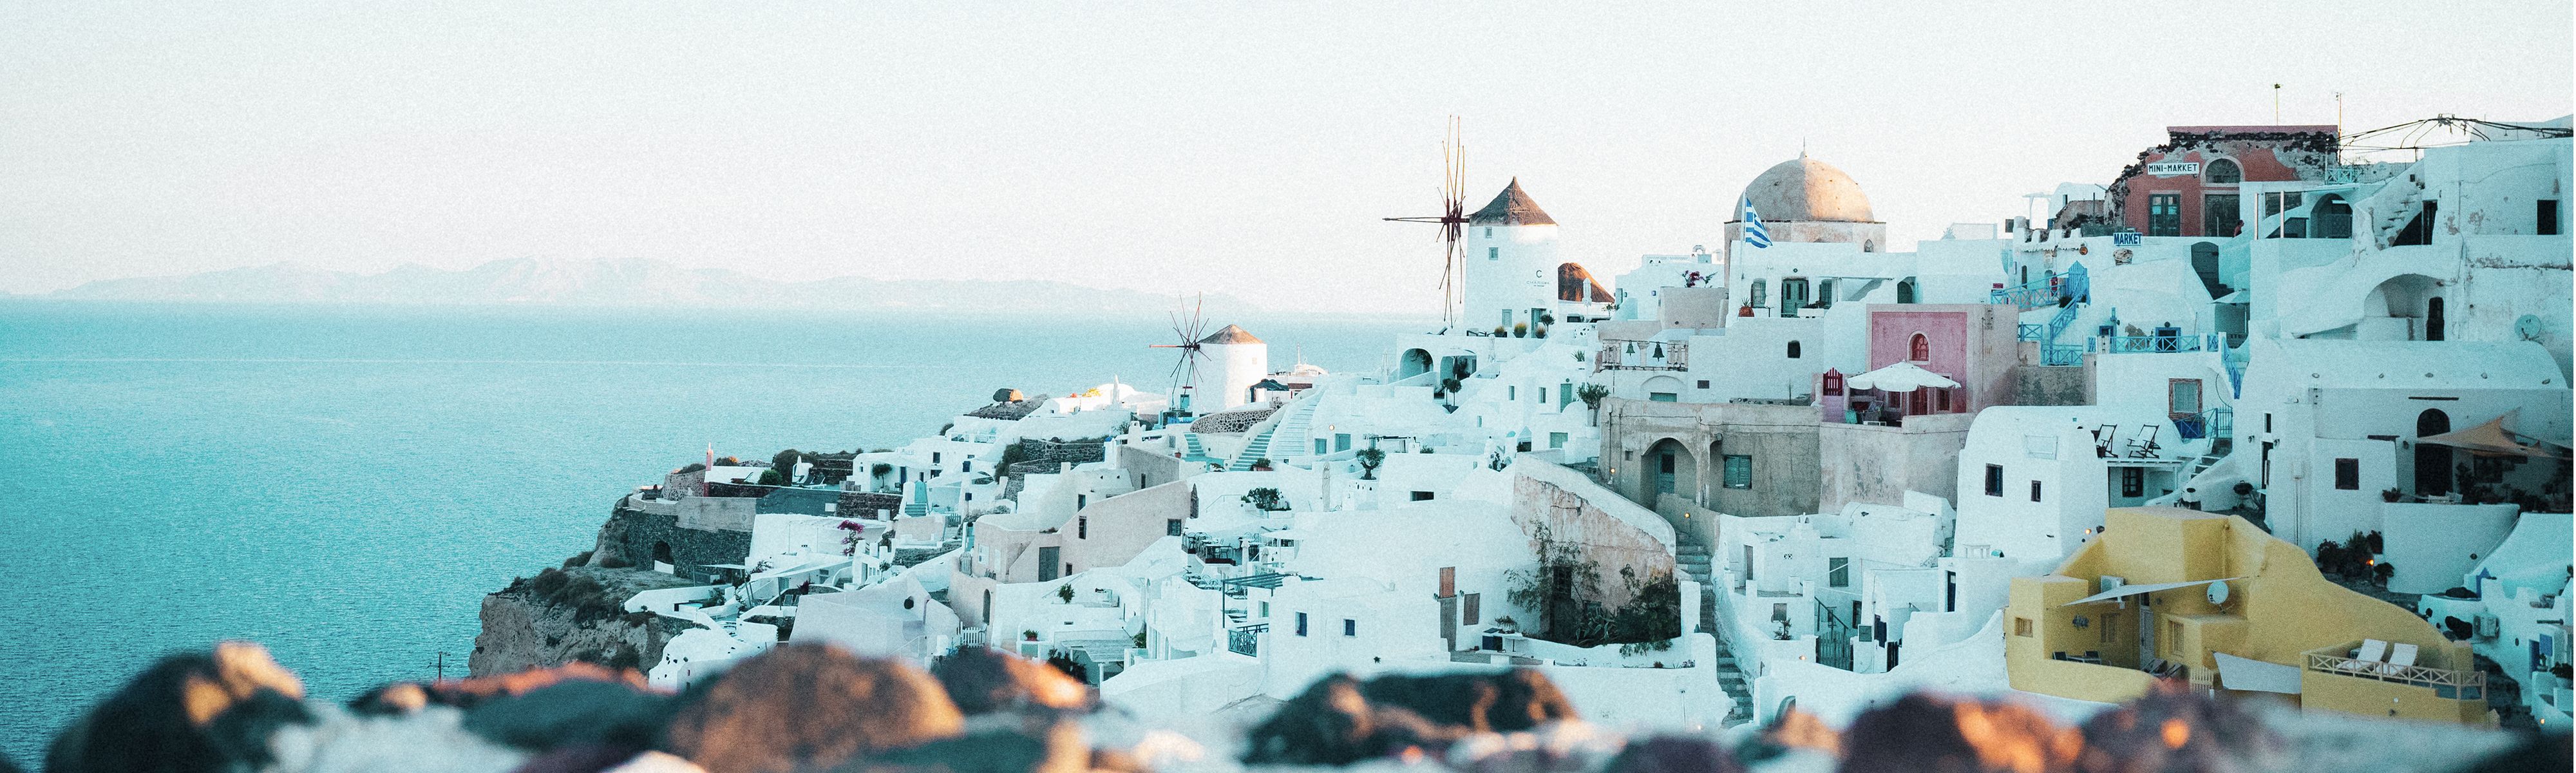 white buildings and windmills along greece's coastline